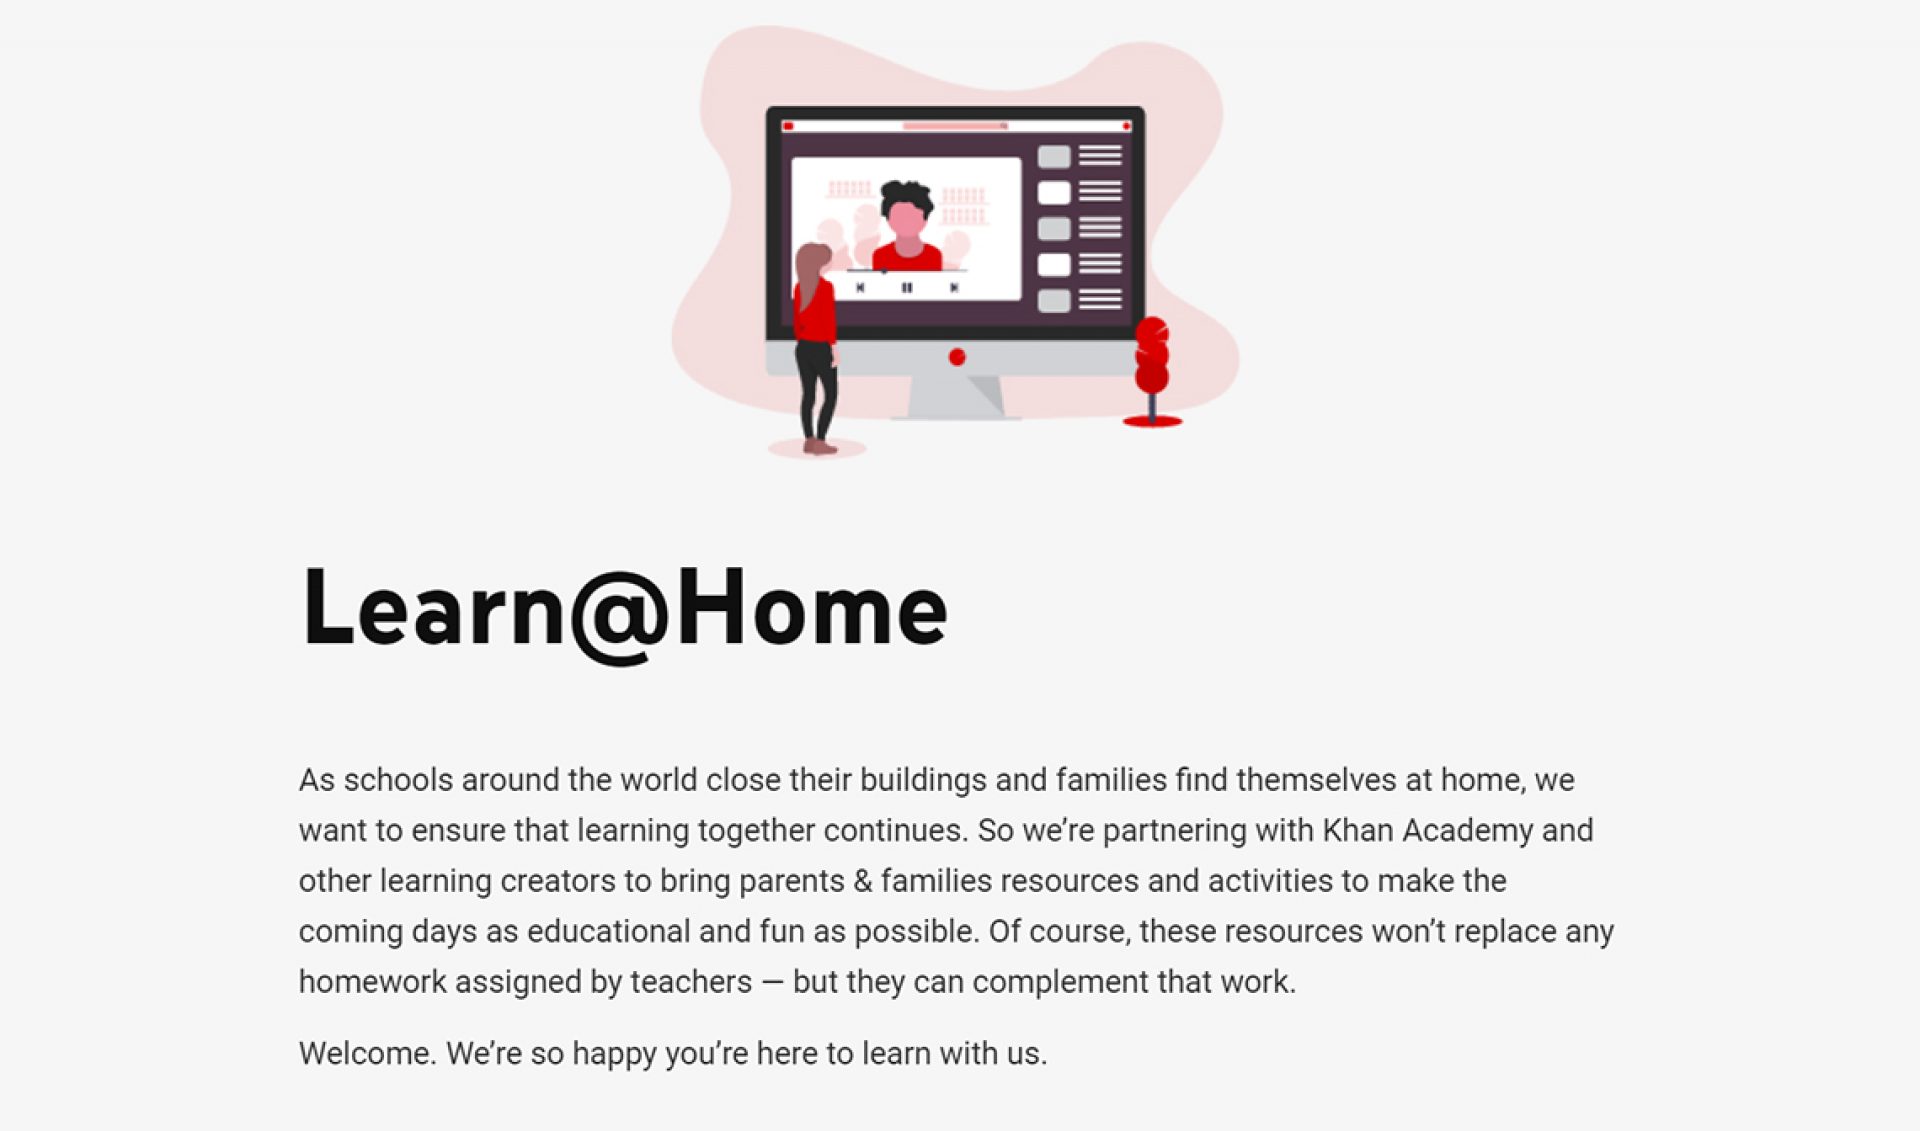 YouTube Launches ‘Learn@Home’ Educational Hub For Kids Kept Home By COVID-19